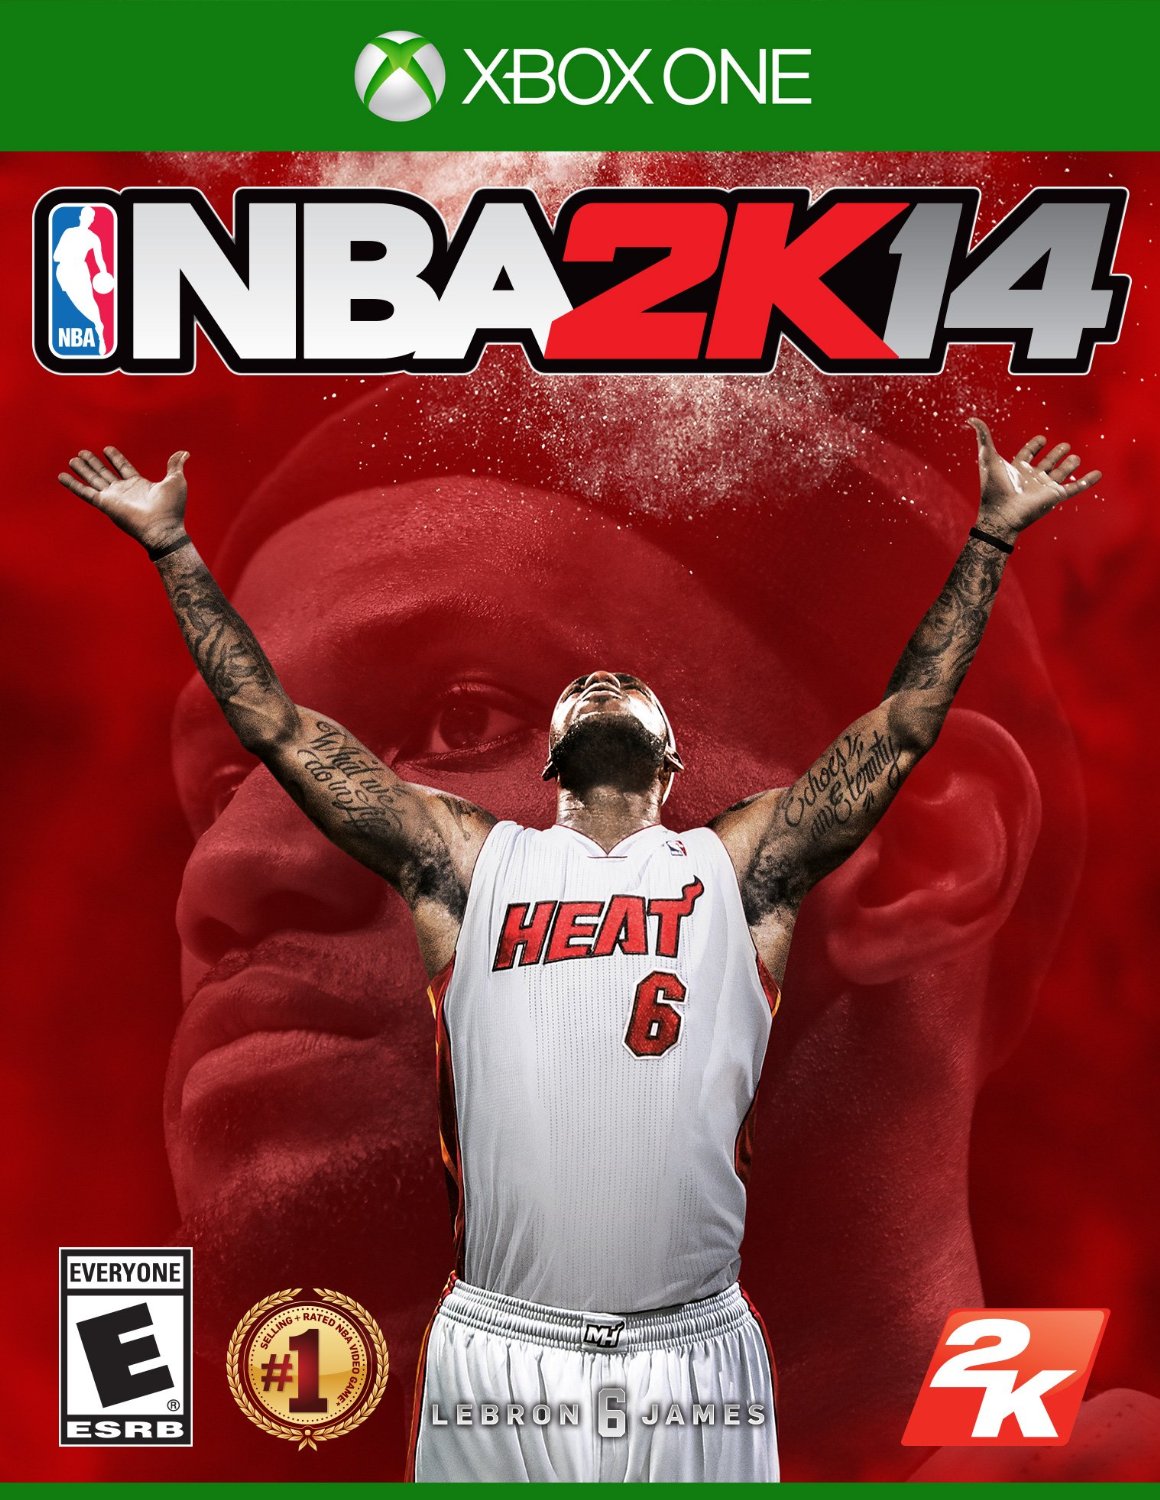 NBA 2K14 Game Only $9.09 – 77% Savings!! (Multiple Consoles!)